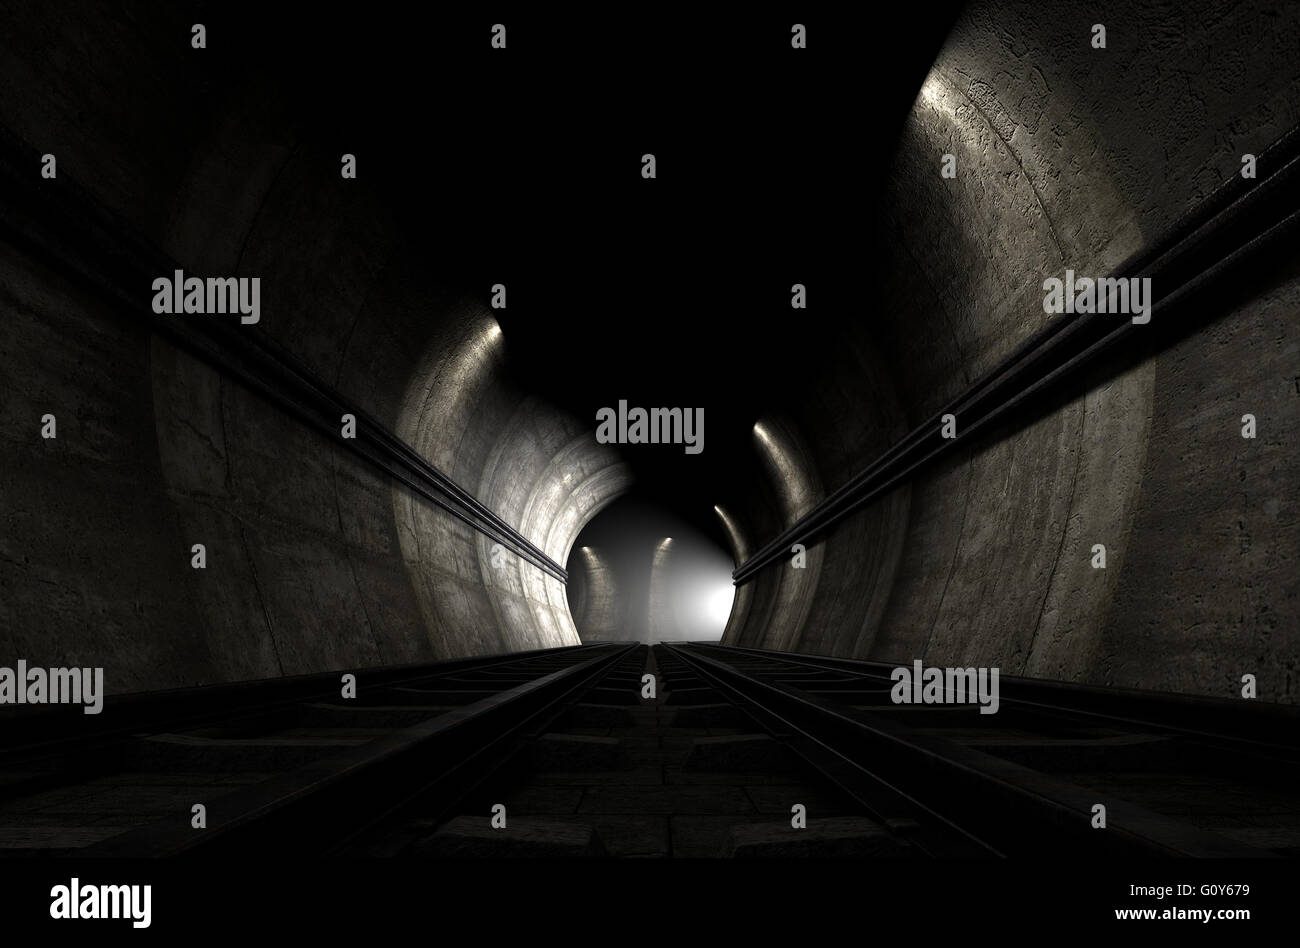 A brick underground train tunnel  that splits into two directions with an apparent train approaching around the corner Stock Photo